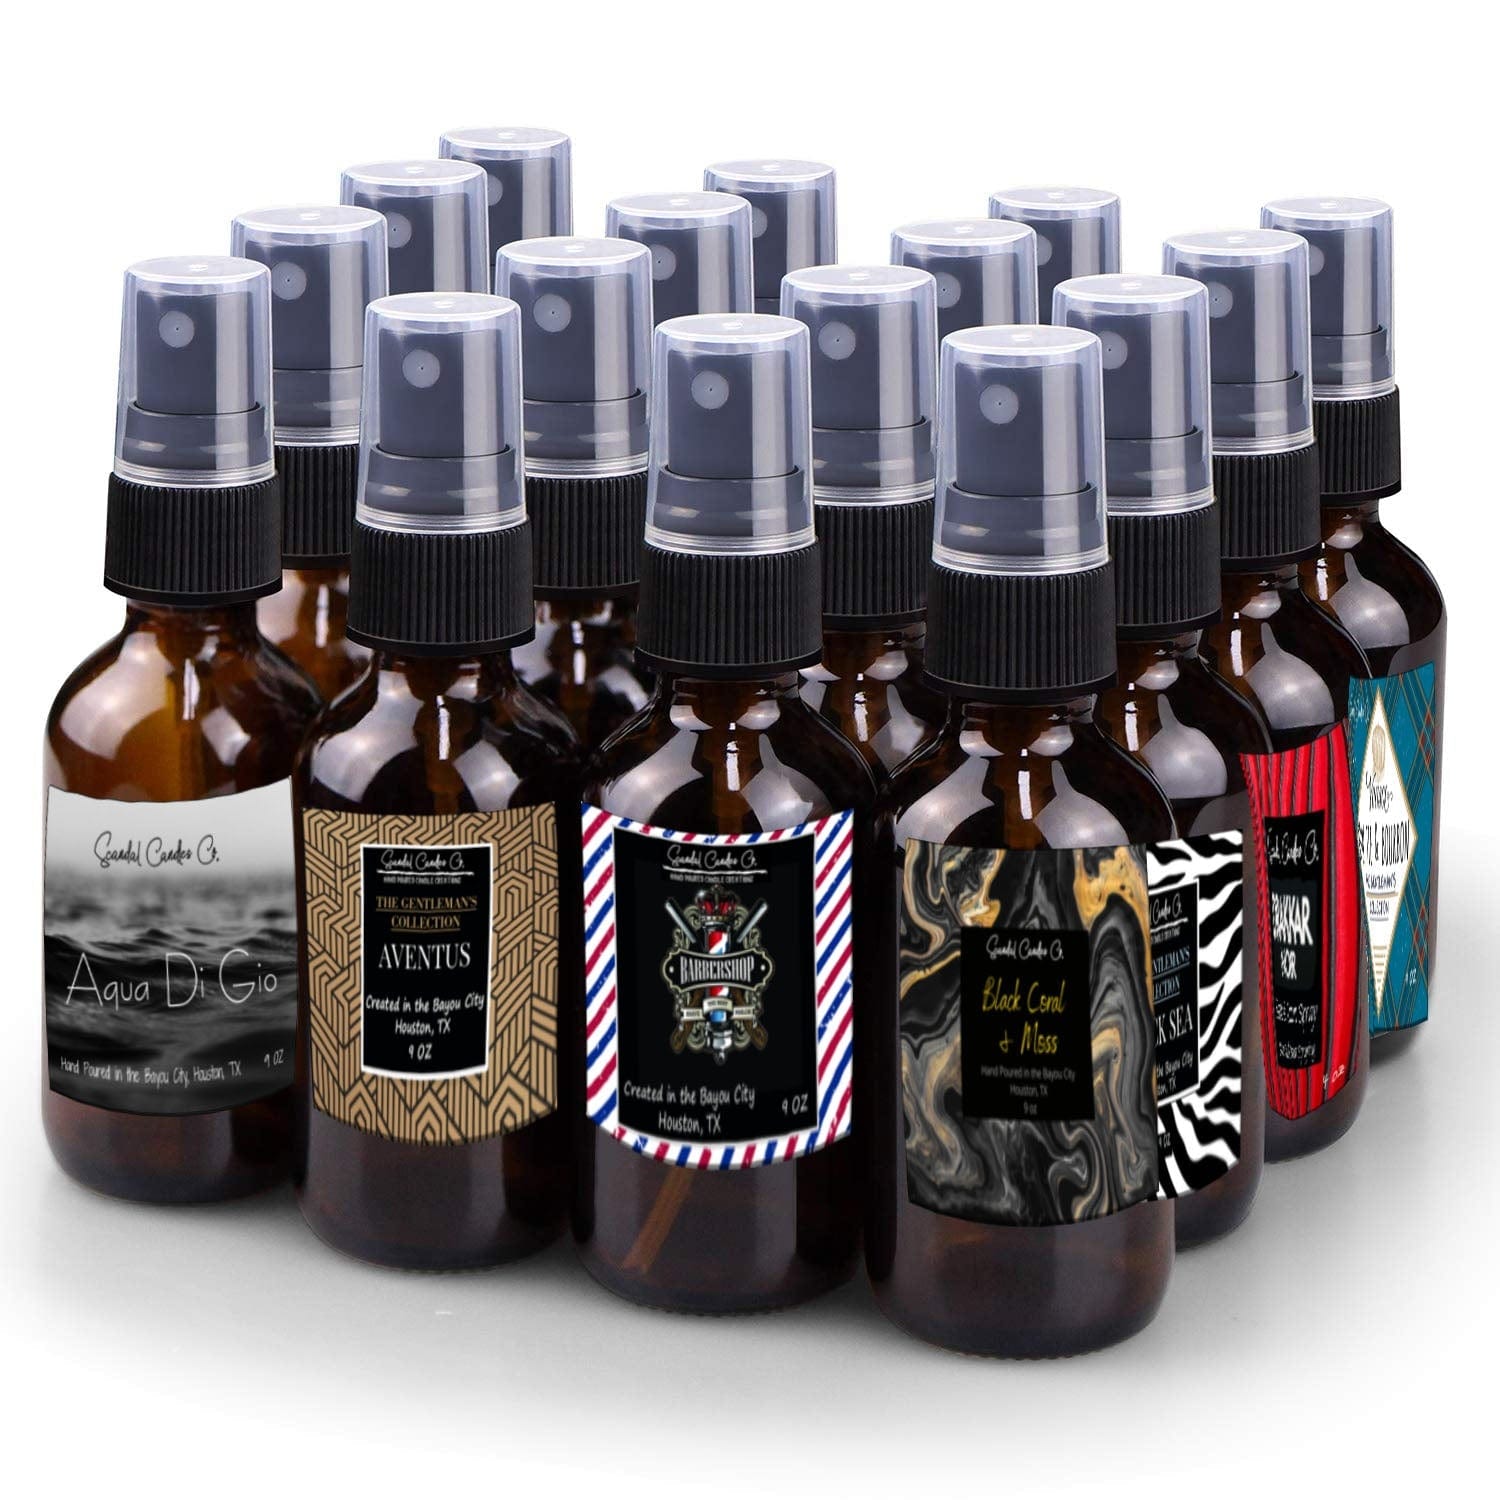 The Gentlemans Collection - Room & Linen Spray (G-N) - Scandal Candles Co.